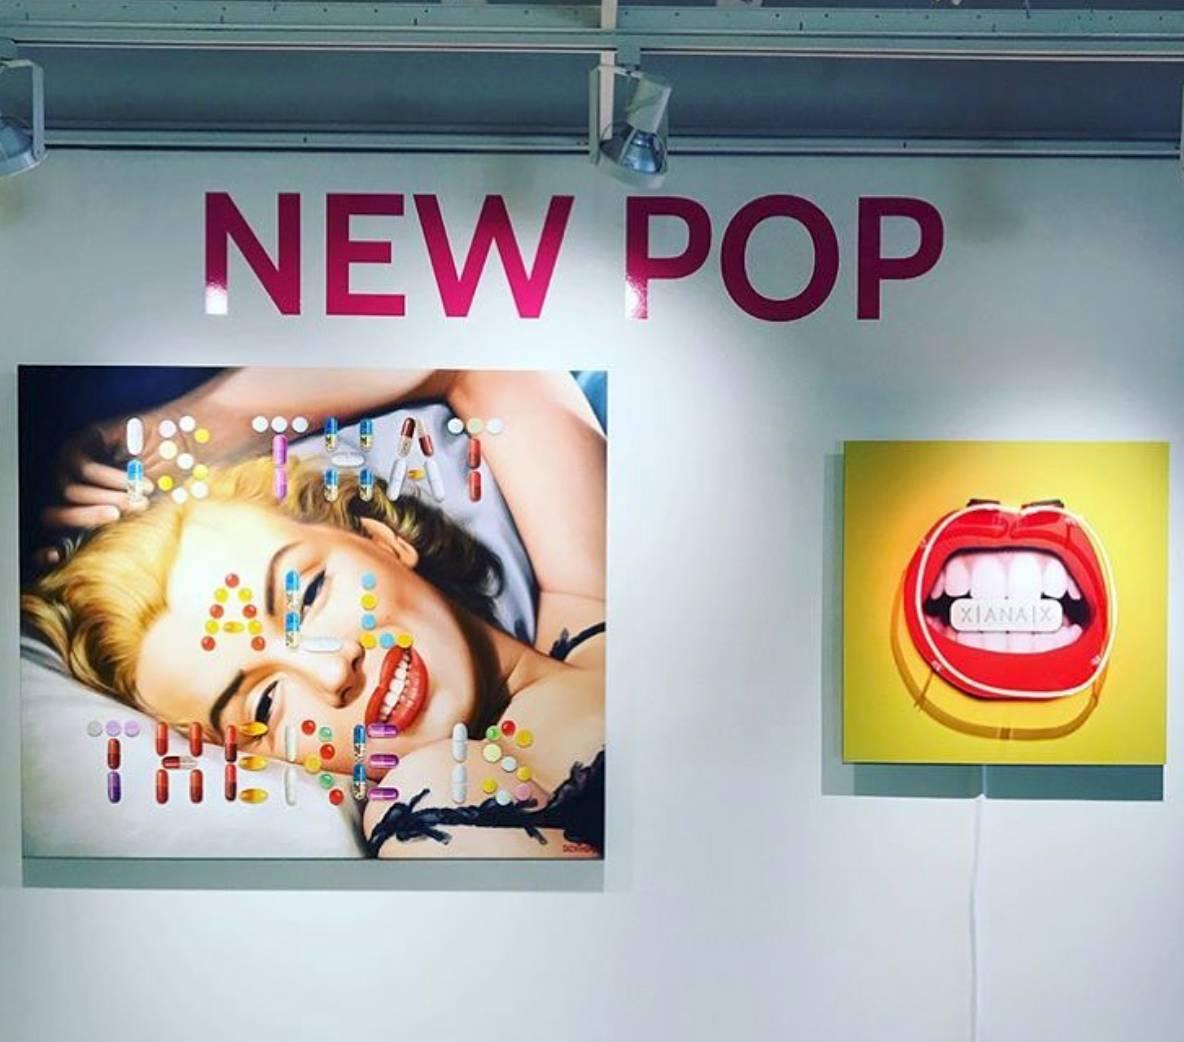 Yellow and red neon print, xanax, mouth photo. 
Neon tubes on photographic print on aluminum dibond. Neon installation, bright colors. Contemporary wall piece. 
Sara Zaher is a visual artist based in New York.
Recently she completed her MA (Dist) in